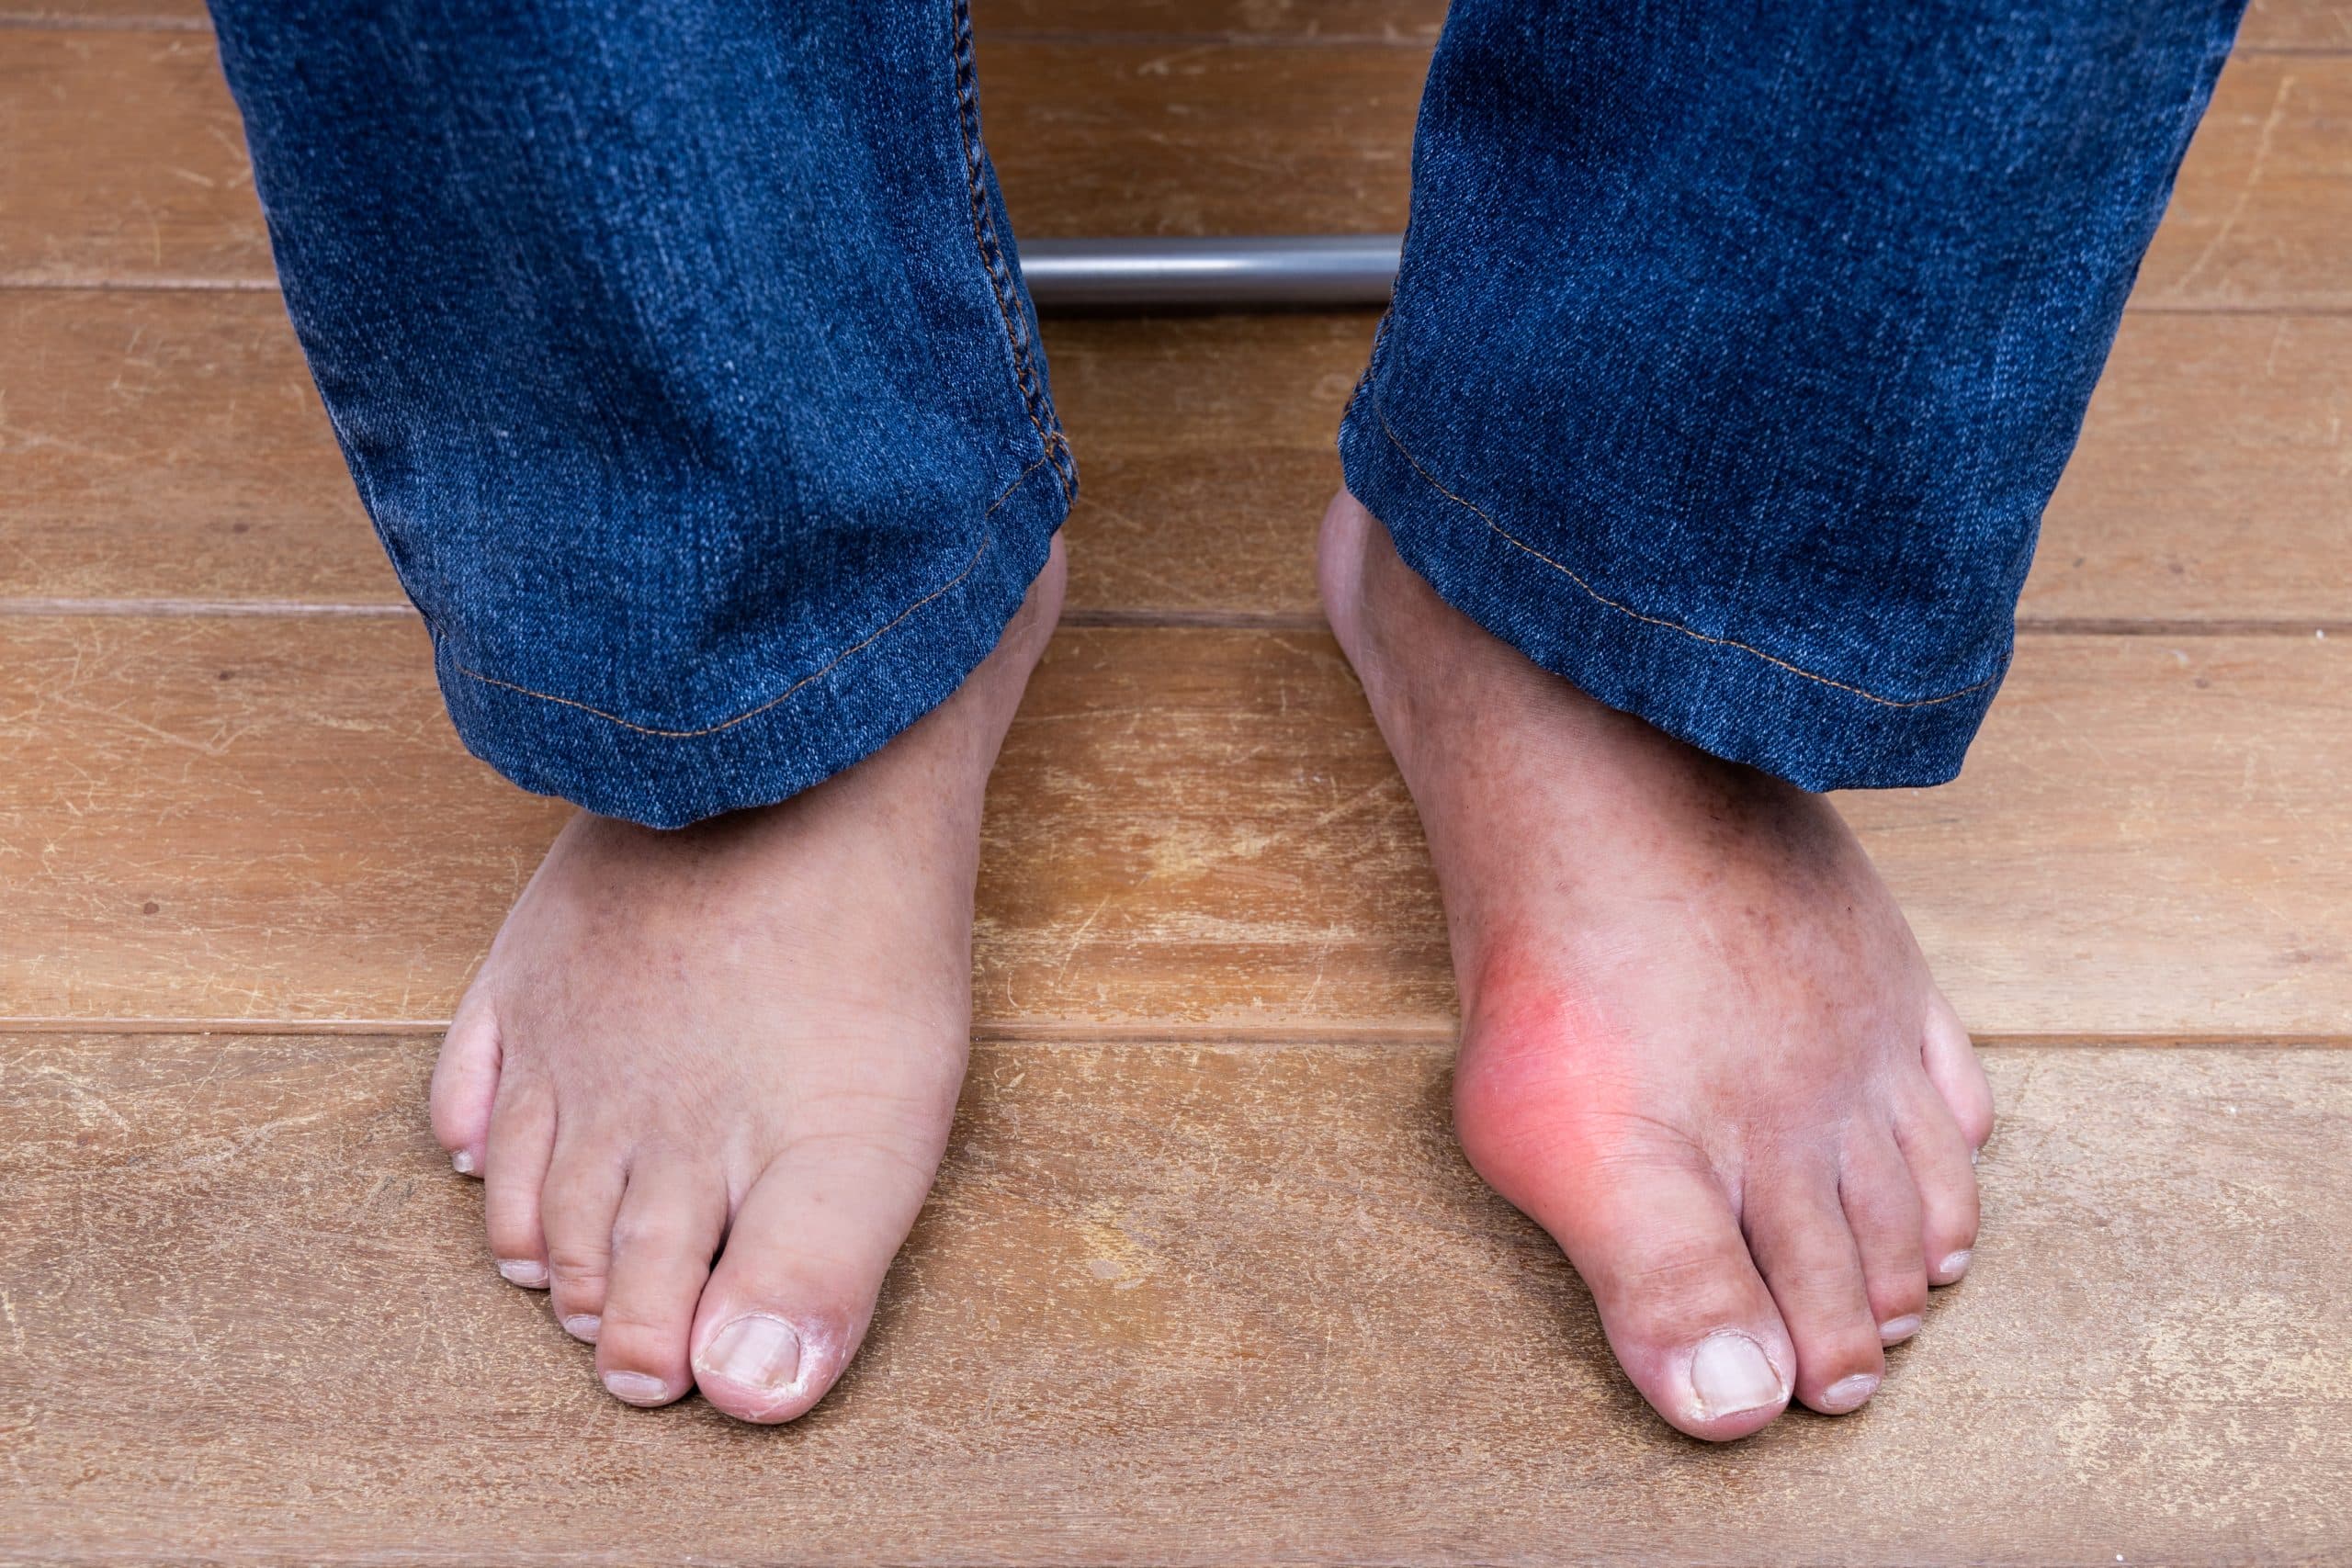 Gout and Diabetes